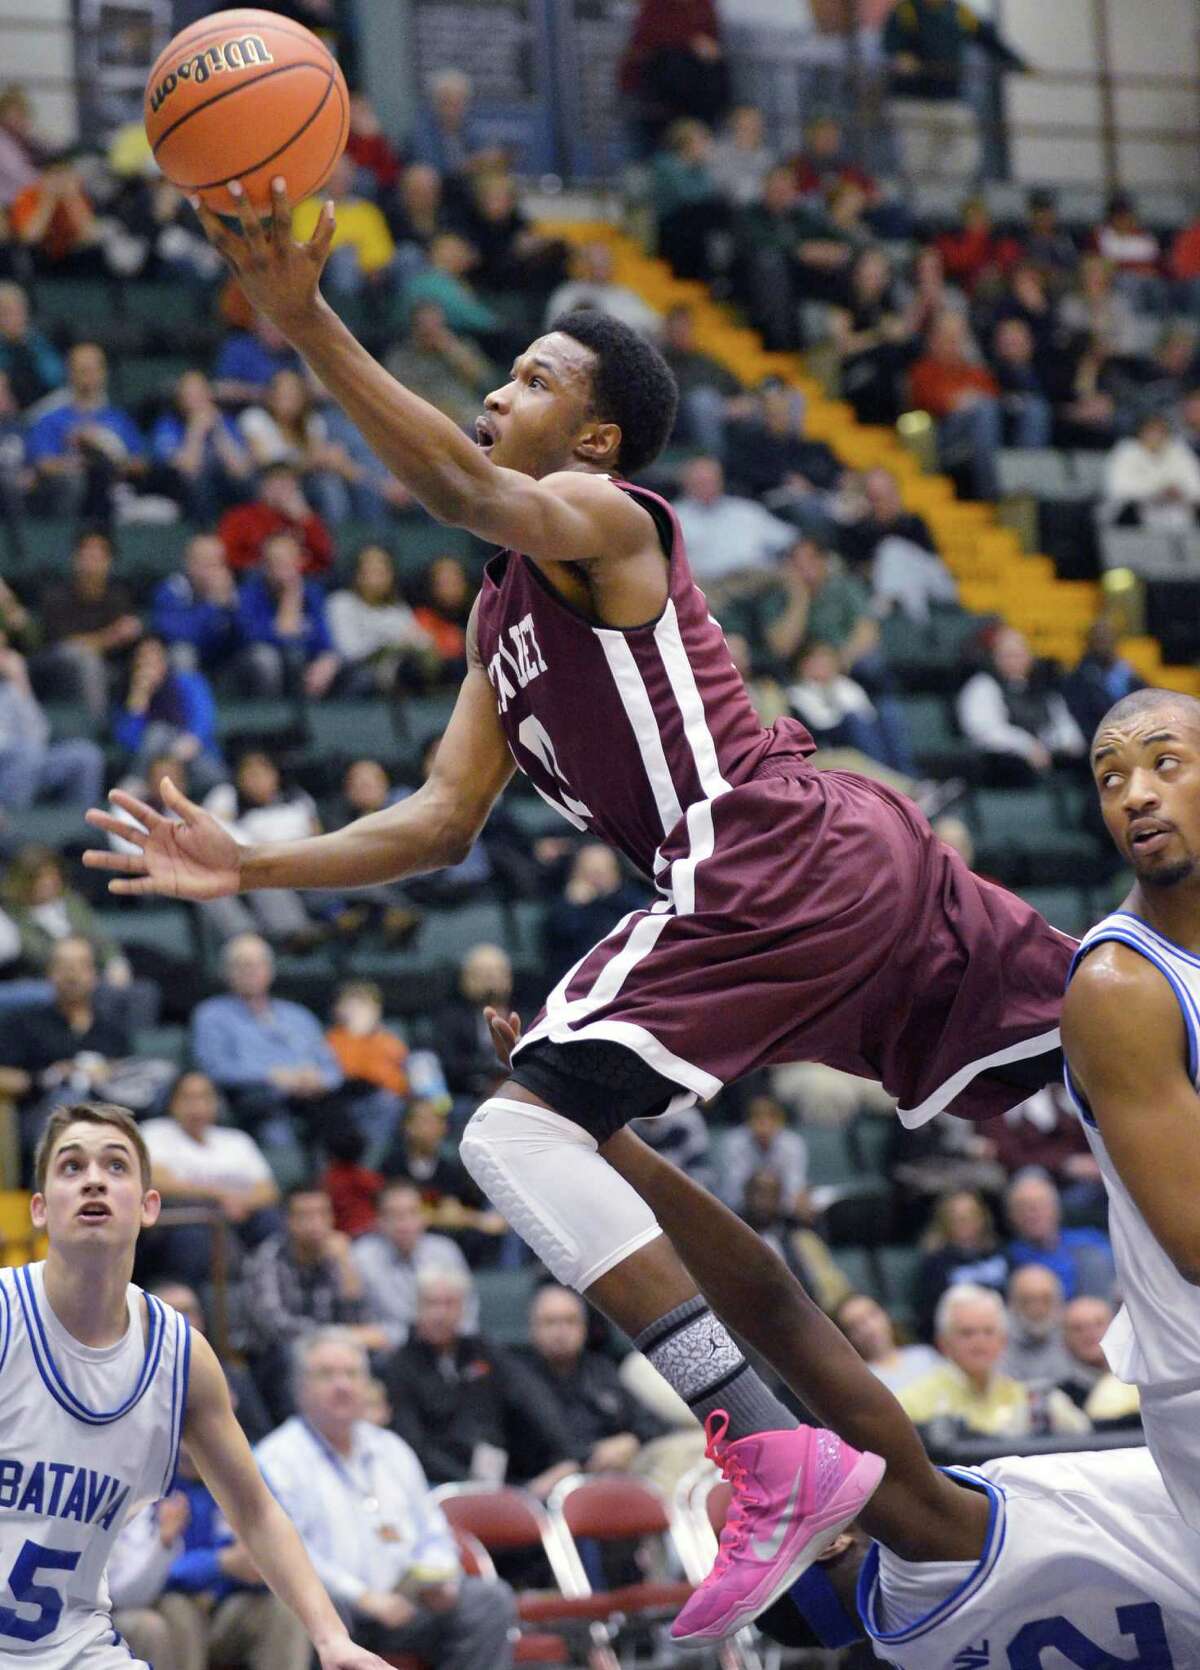 Watervliet's #10 Tyler McLeod drives to the basket against Batavia in the Class B semifinal at Glens Falls Civic Center Friday March 15, 2013. (John Carl D'Annibale / Times Union)